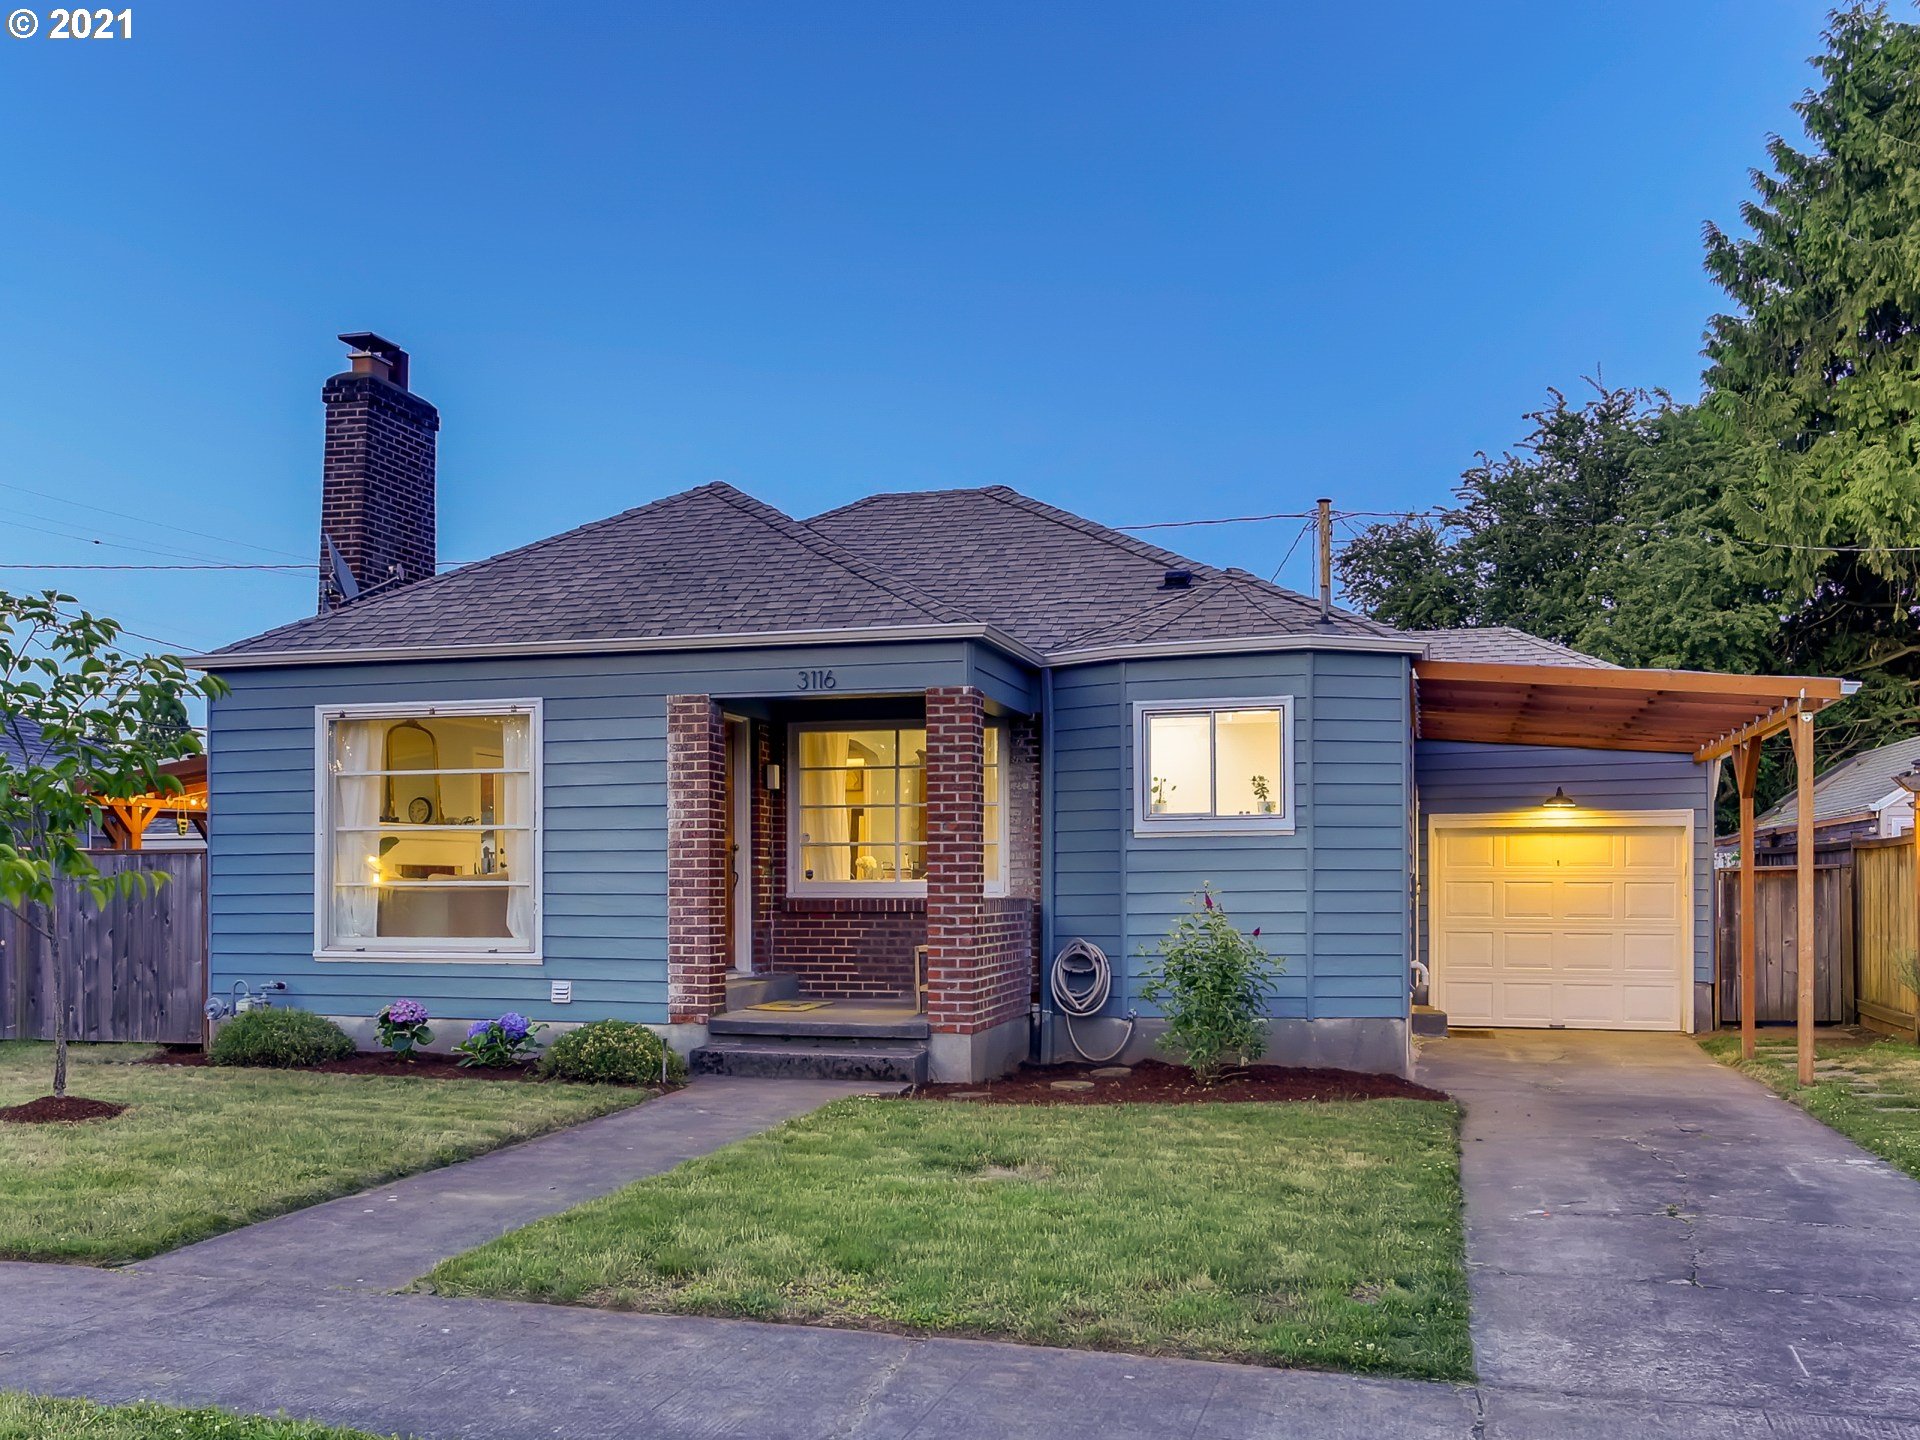 3116 SE 77TH AVE (1 of 31)